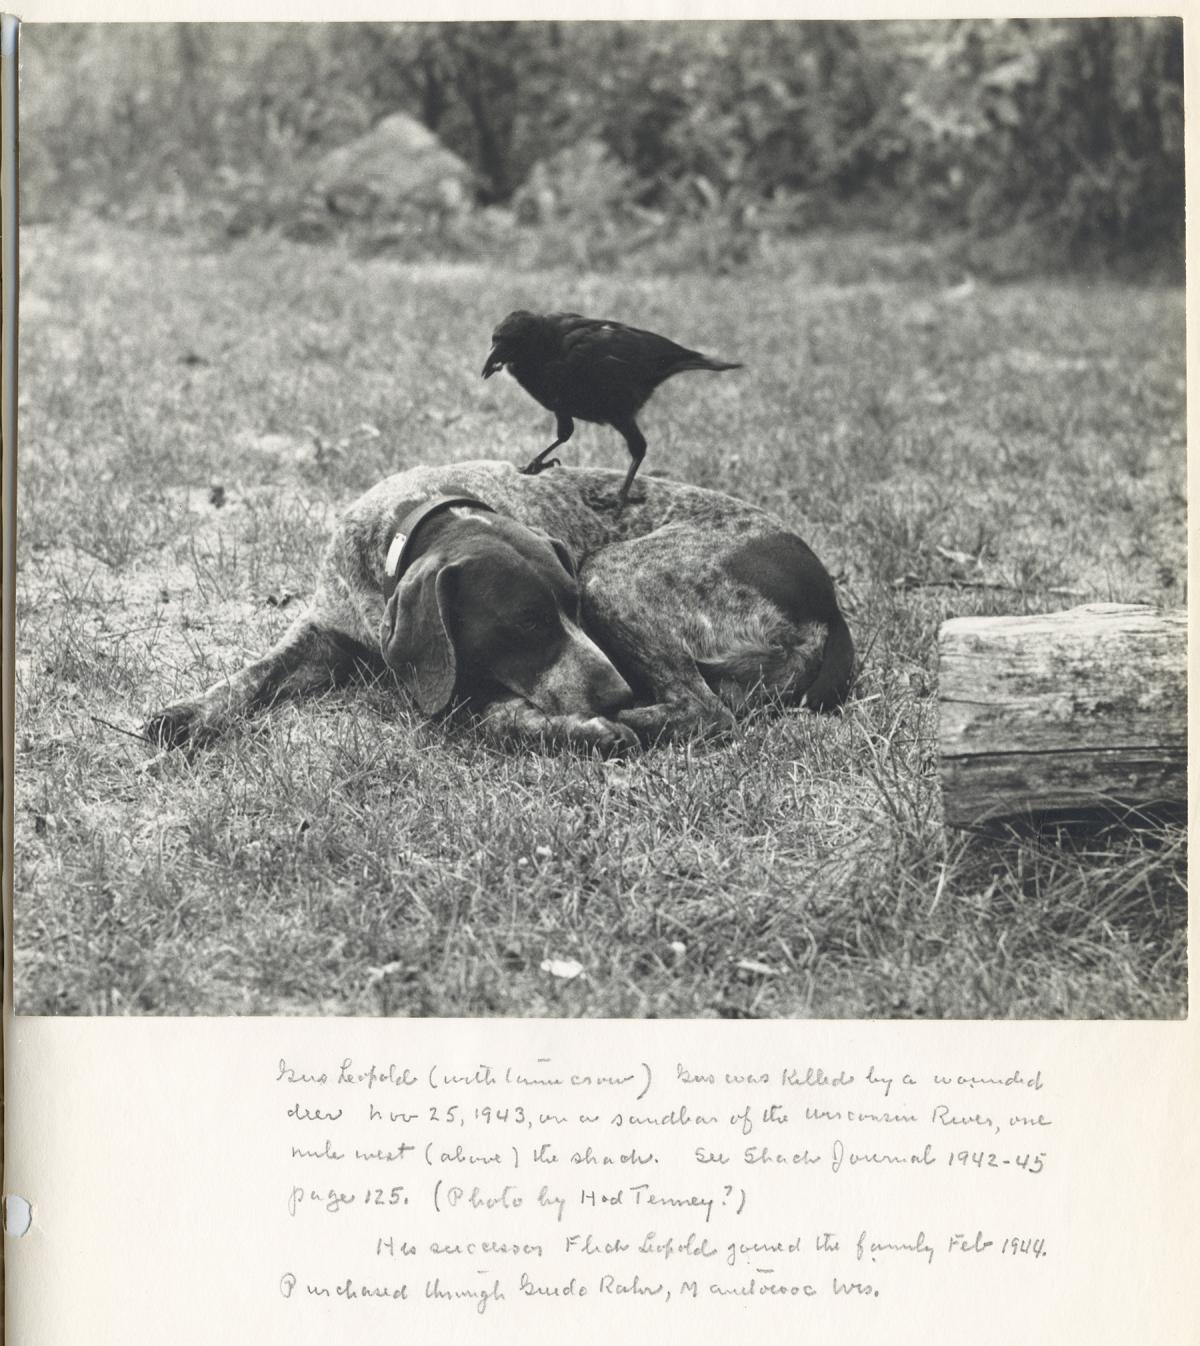 Black and white photo of dog laying down, a crow perched on it, with text at bottom